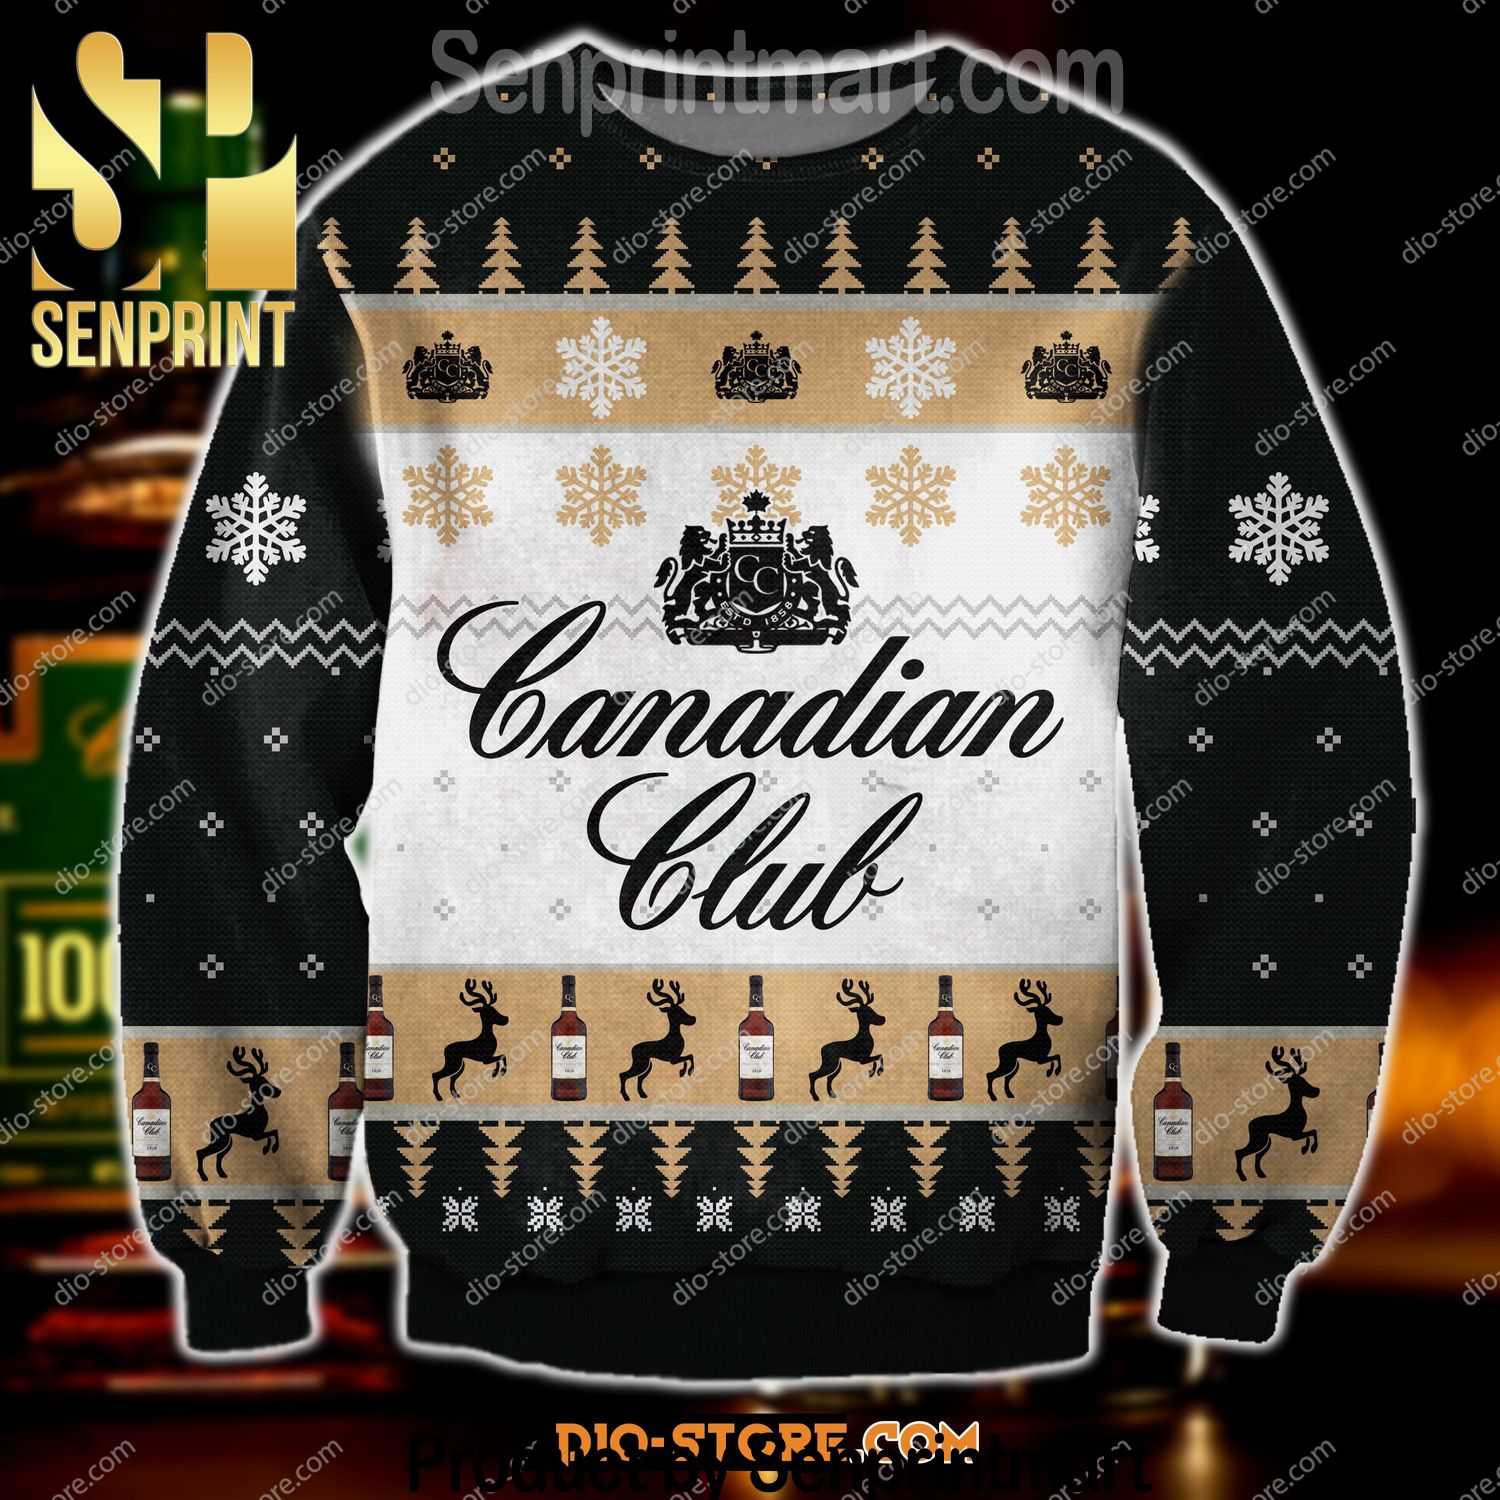 Canadian Club Xmas Time Ugly Christmas Wool Knitted Sweater